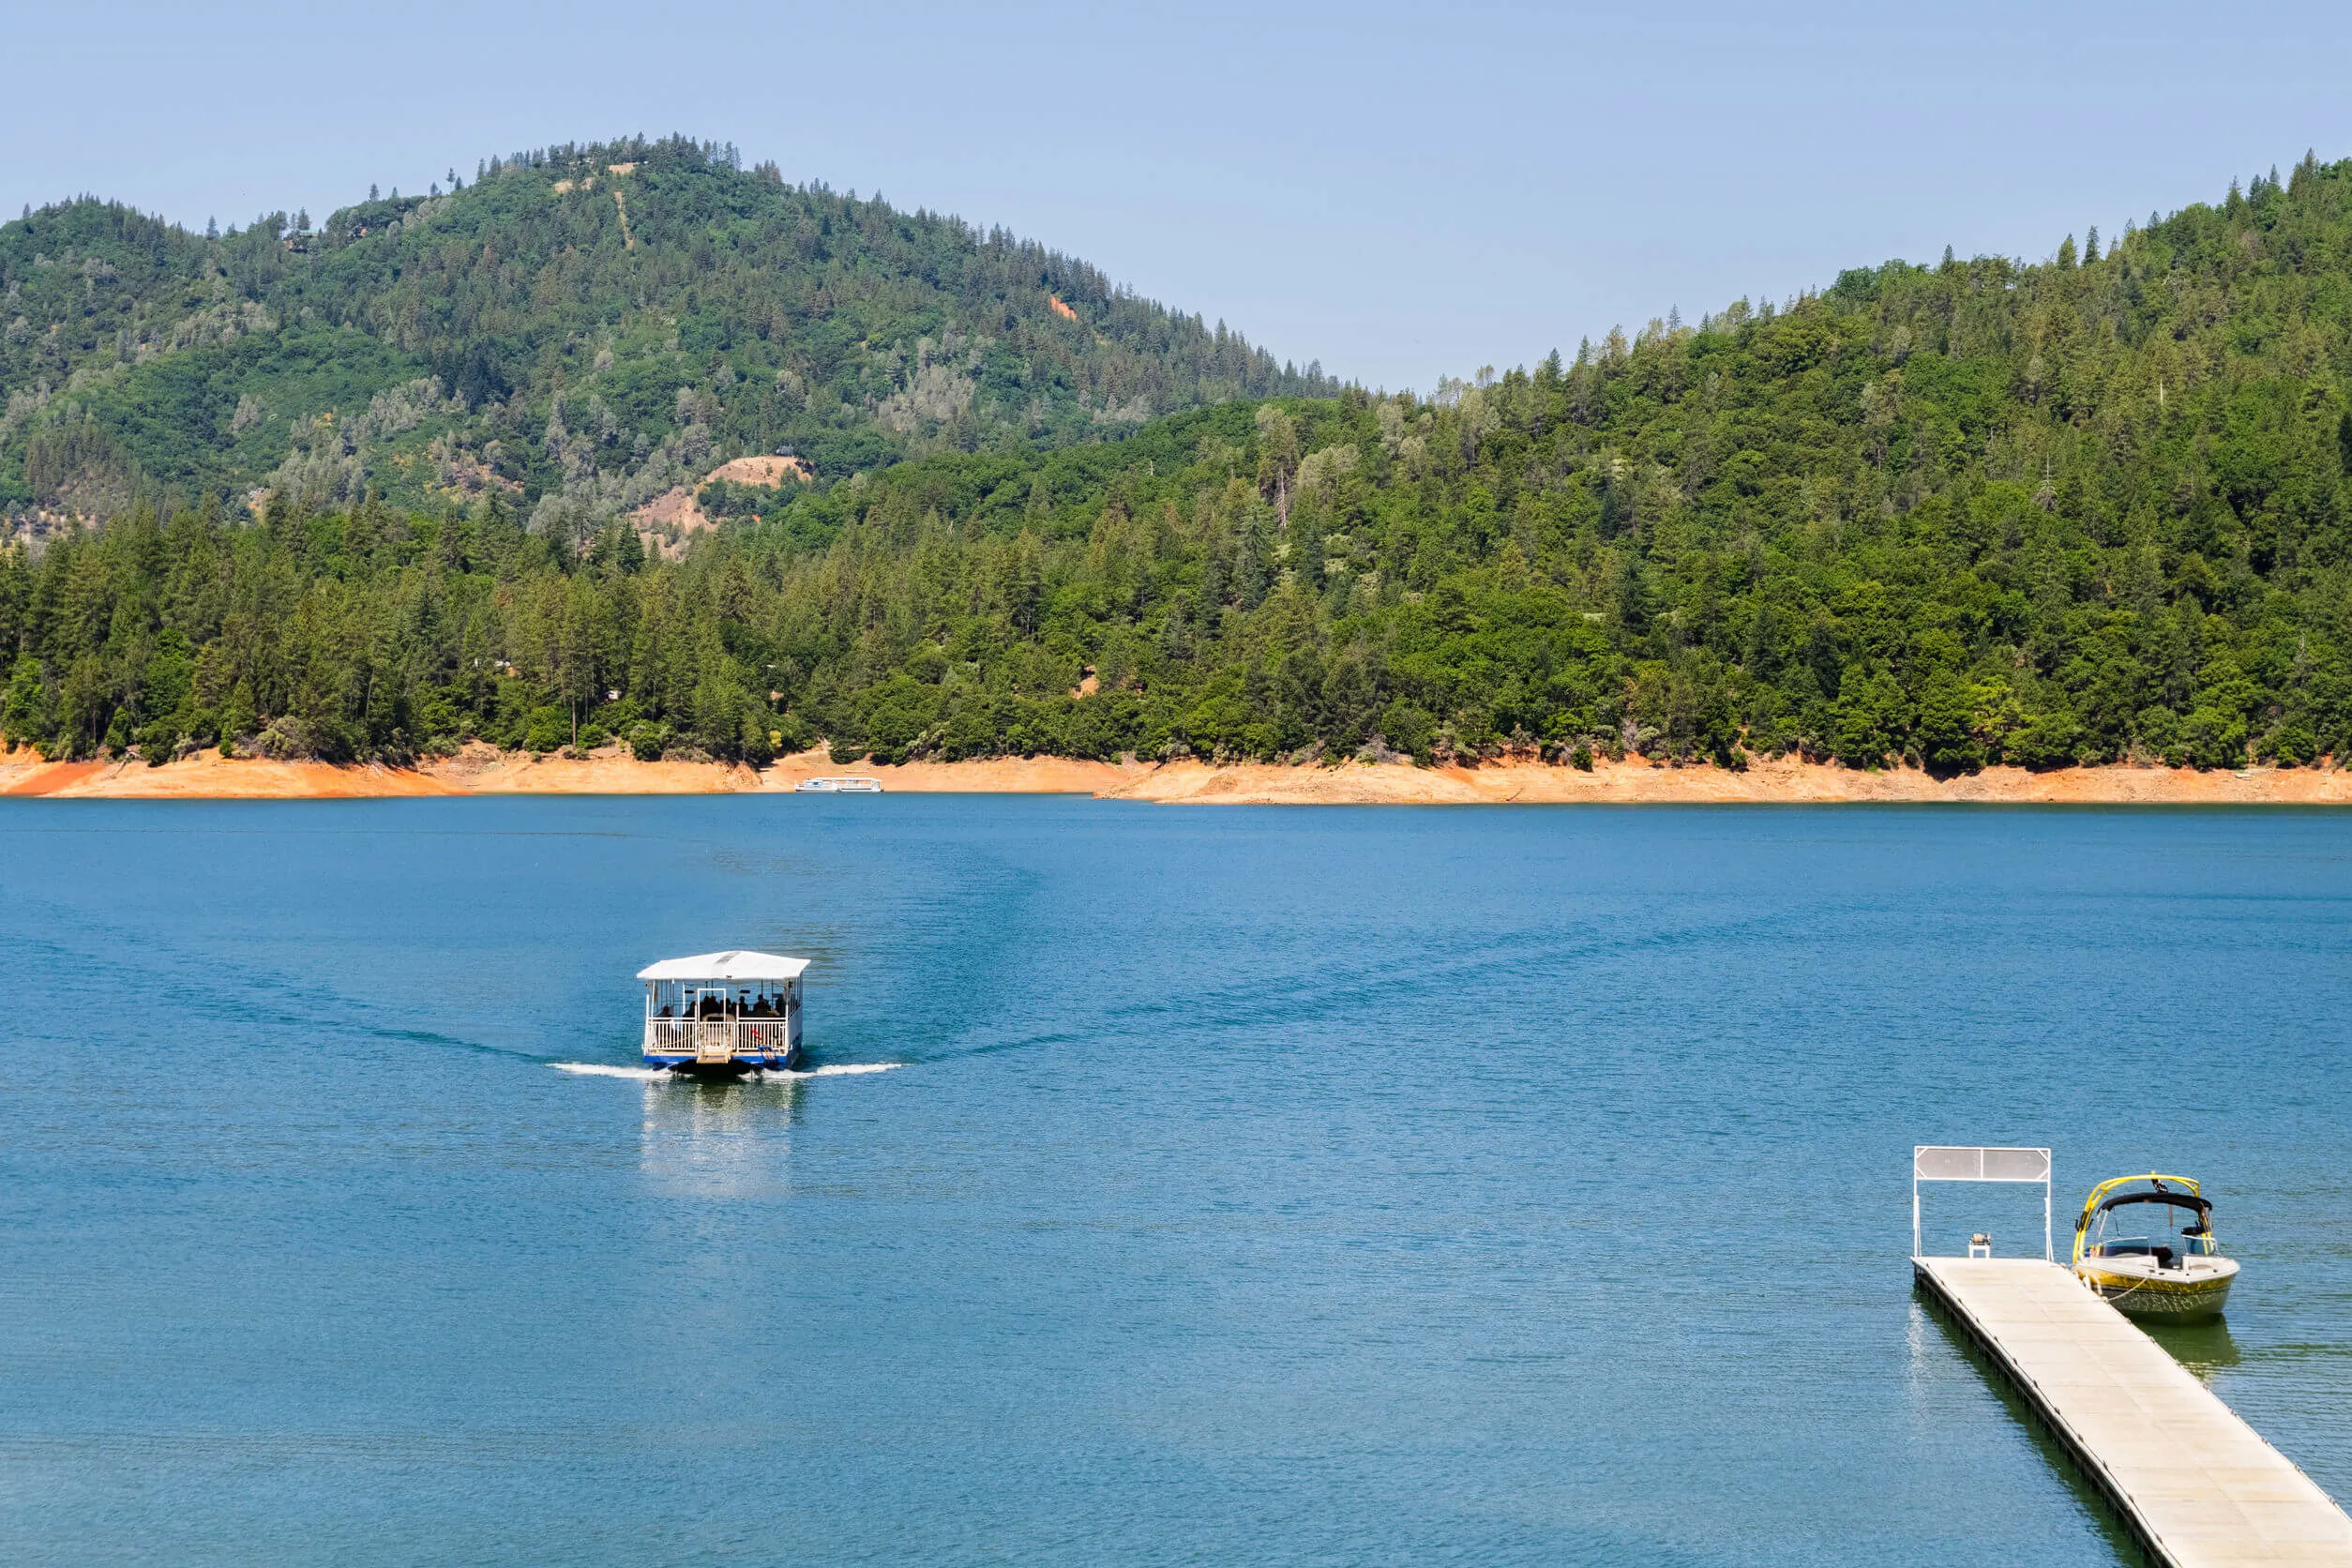 Shasta Lake, McCloud River Arm landscape on a sunny summer day with ship approaching the shoreline, Northern California